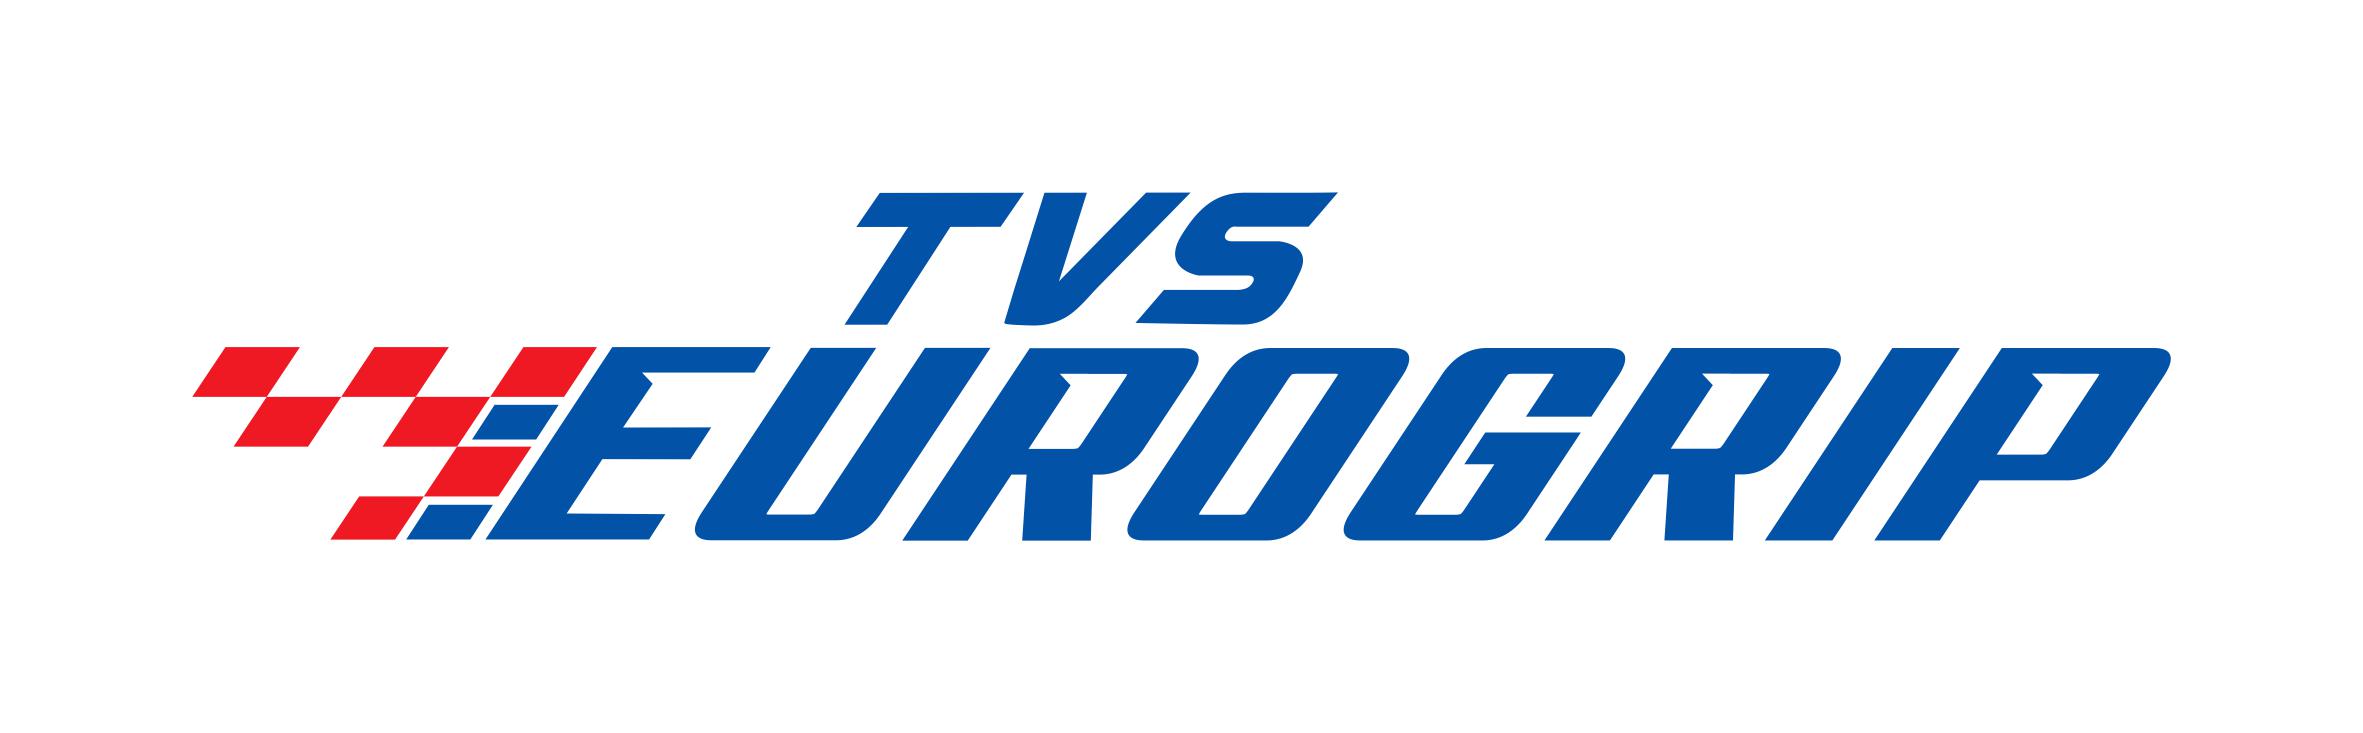 TVS Eurogrip’s new brand campaign talks about Tyres for a Country full of Turns decoding=